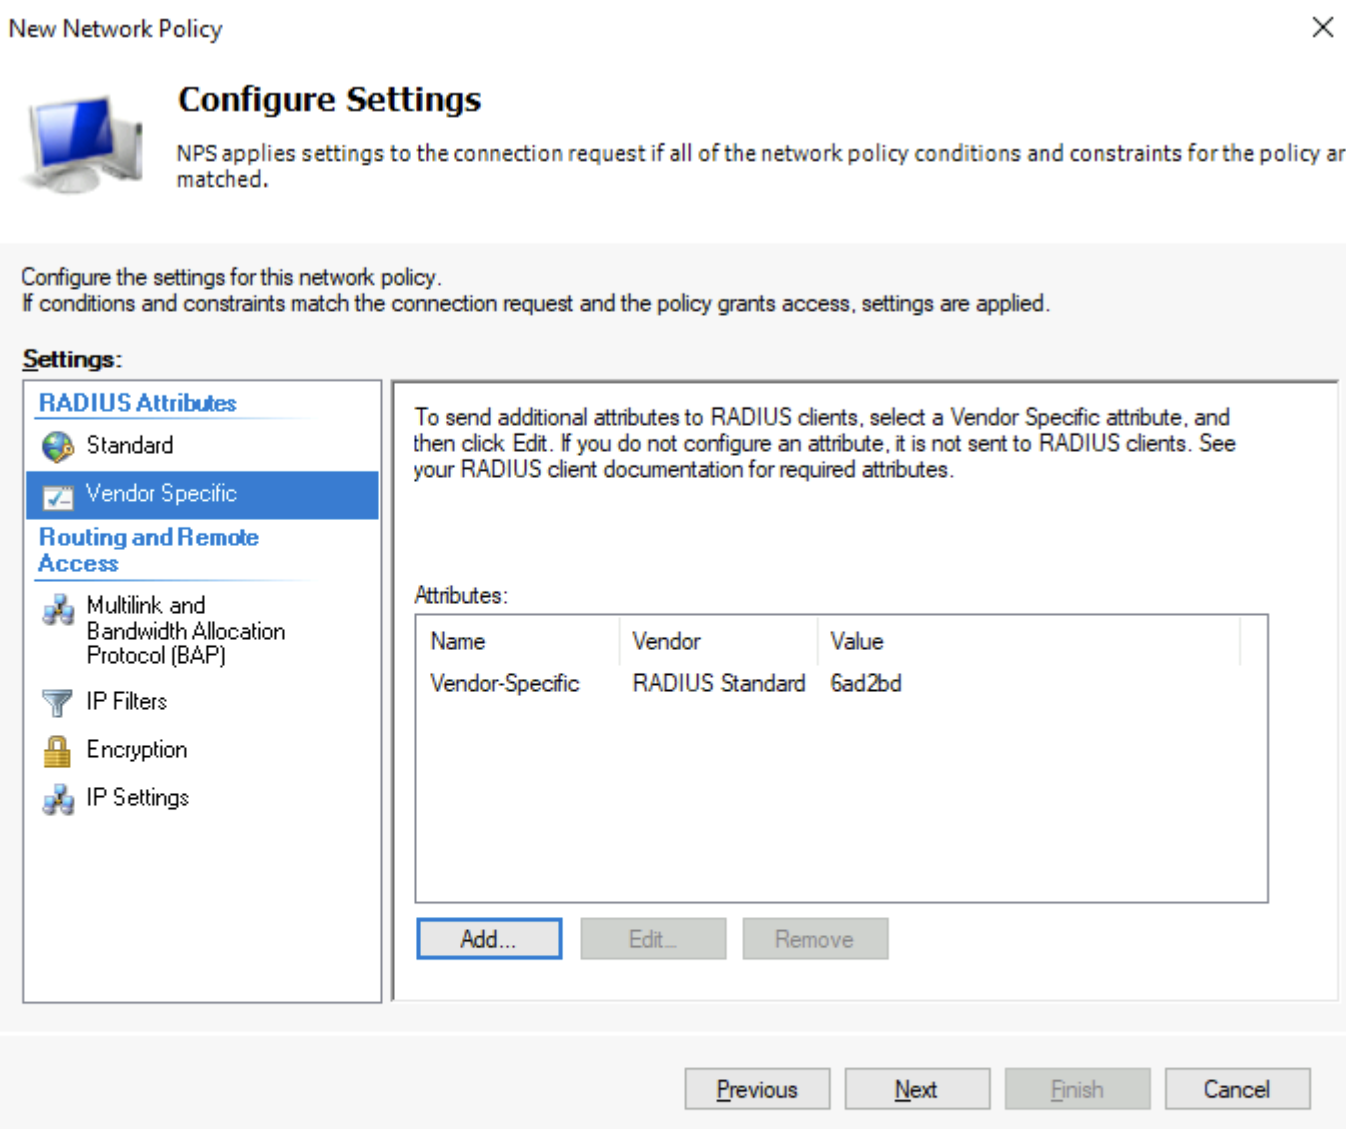 Screenshot of the Configure Settings page with Vendor Specific attributes.